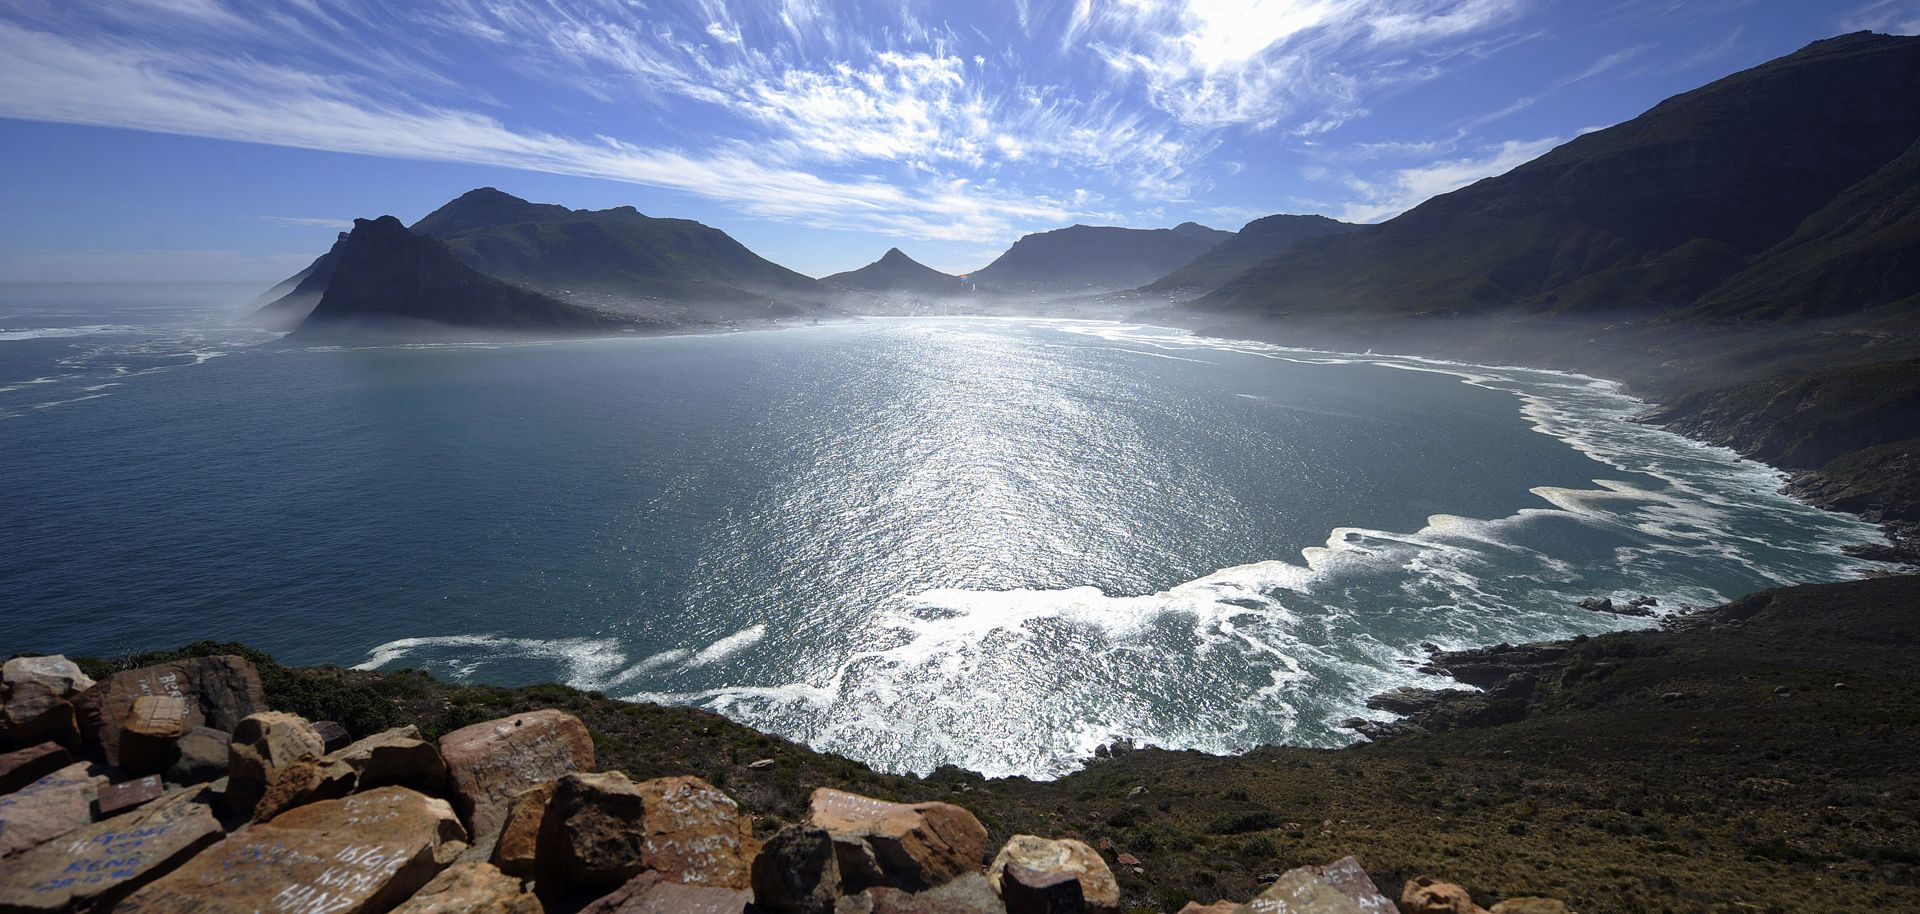 A general view of the Hout Bay harbour covered in mist is seen on May 8, 2010 from the Chapman's peak road on the outskirts of Cape Town. Chapman's peak road is the coastal link between Cape Town and the Cape of Good Hope. When following the African coastline from the equator the Cape of Good Hope marks the psychologically important point where one begins to travel more eastward than southward, thus the first rounding of the cape in 1488 by Portuguese explorer Bartolomeu Dias was a major milestone in the at